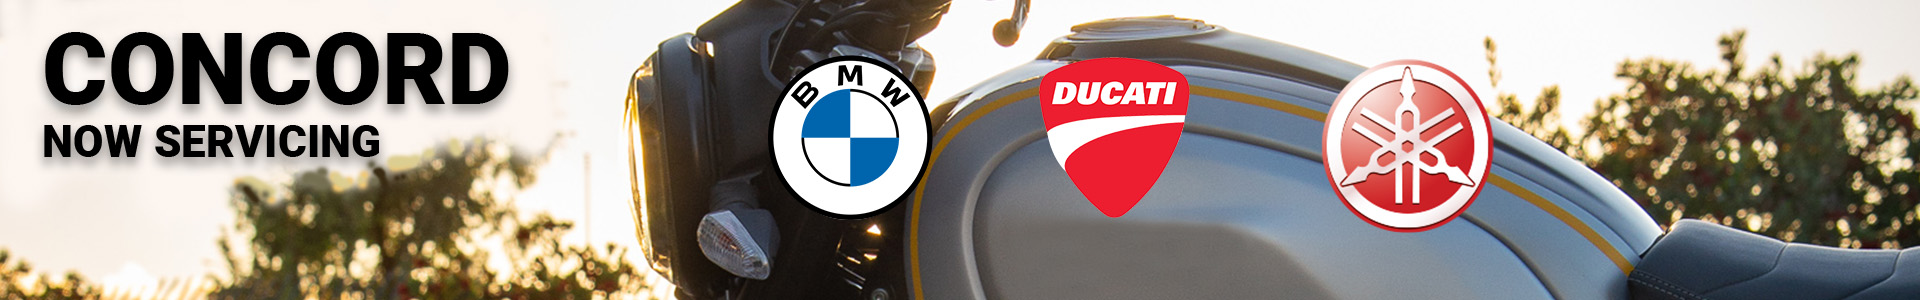 SoSo Cycles - Concord's service department is your go to for BMW, Ducati and Yamaha service